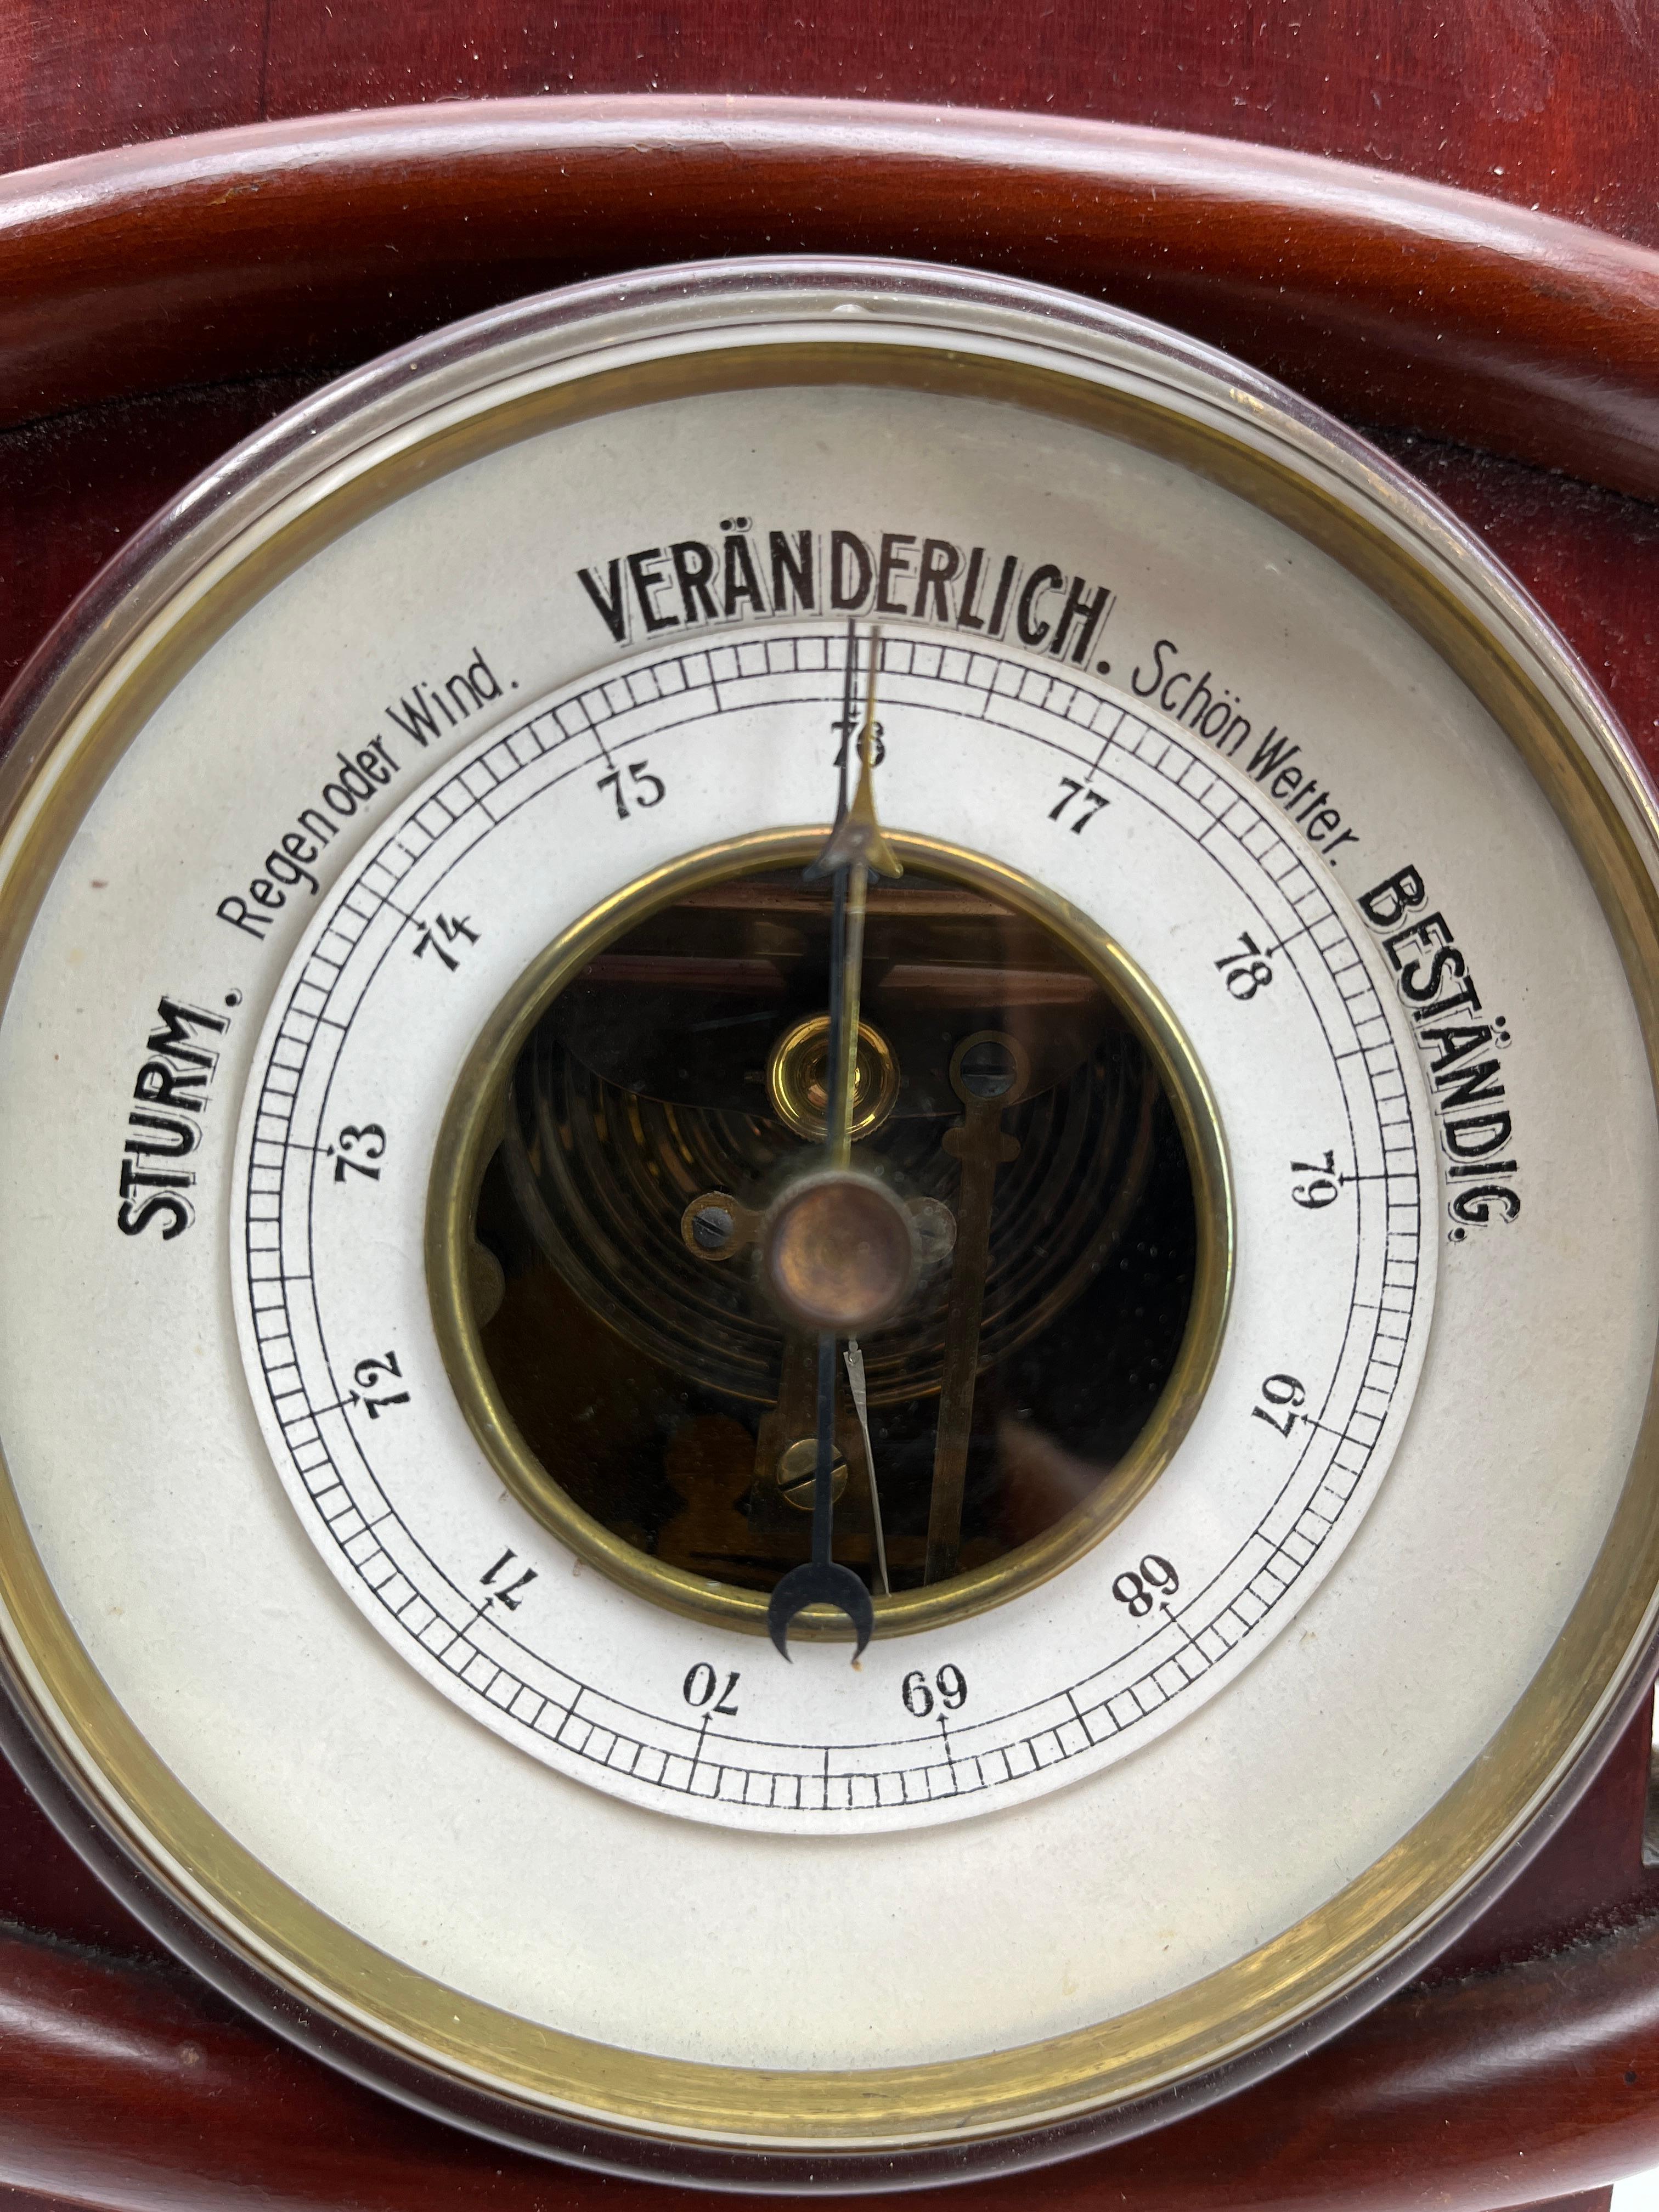 Art Deco Style Barometer with Mercury Thermometer Weather Station Antique Decorative Cherrywood Wall Barometer Austria 1920s

Please don't hesitate to get in touch with any further questions.  
With best wishes, Geert
Early Bird